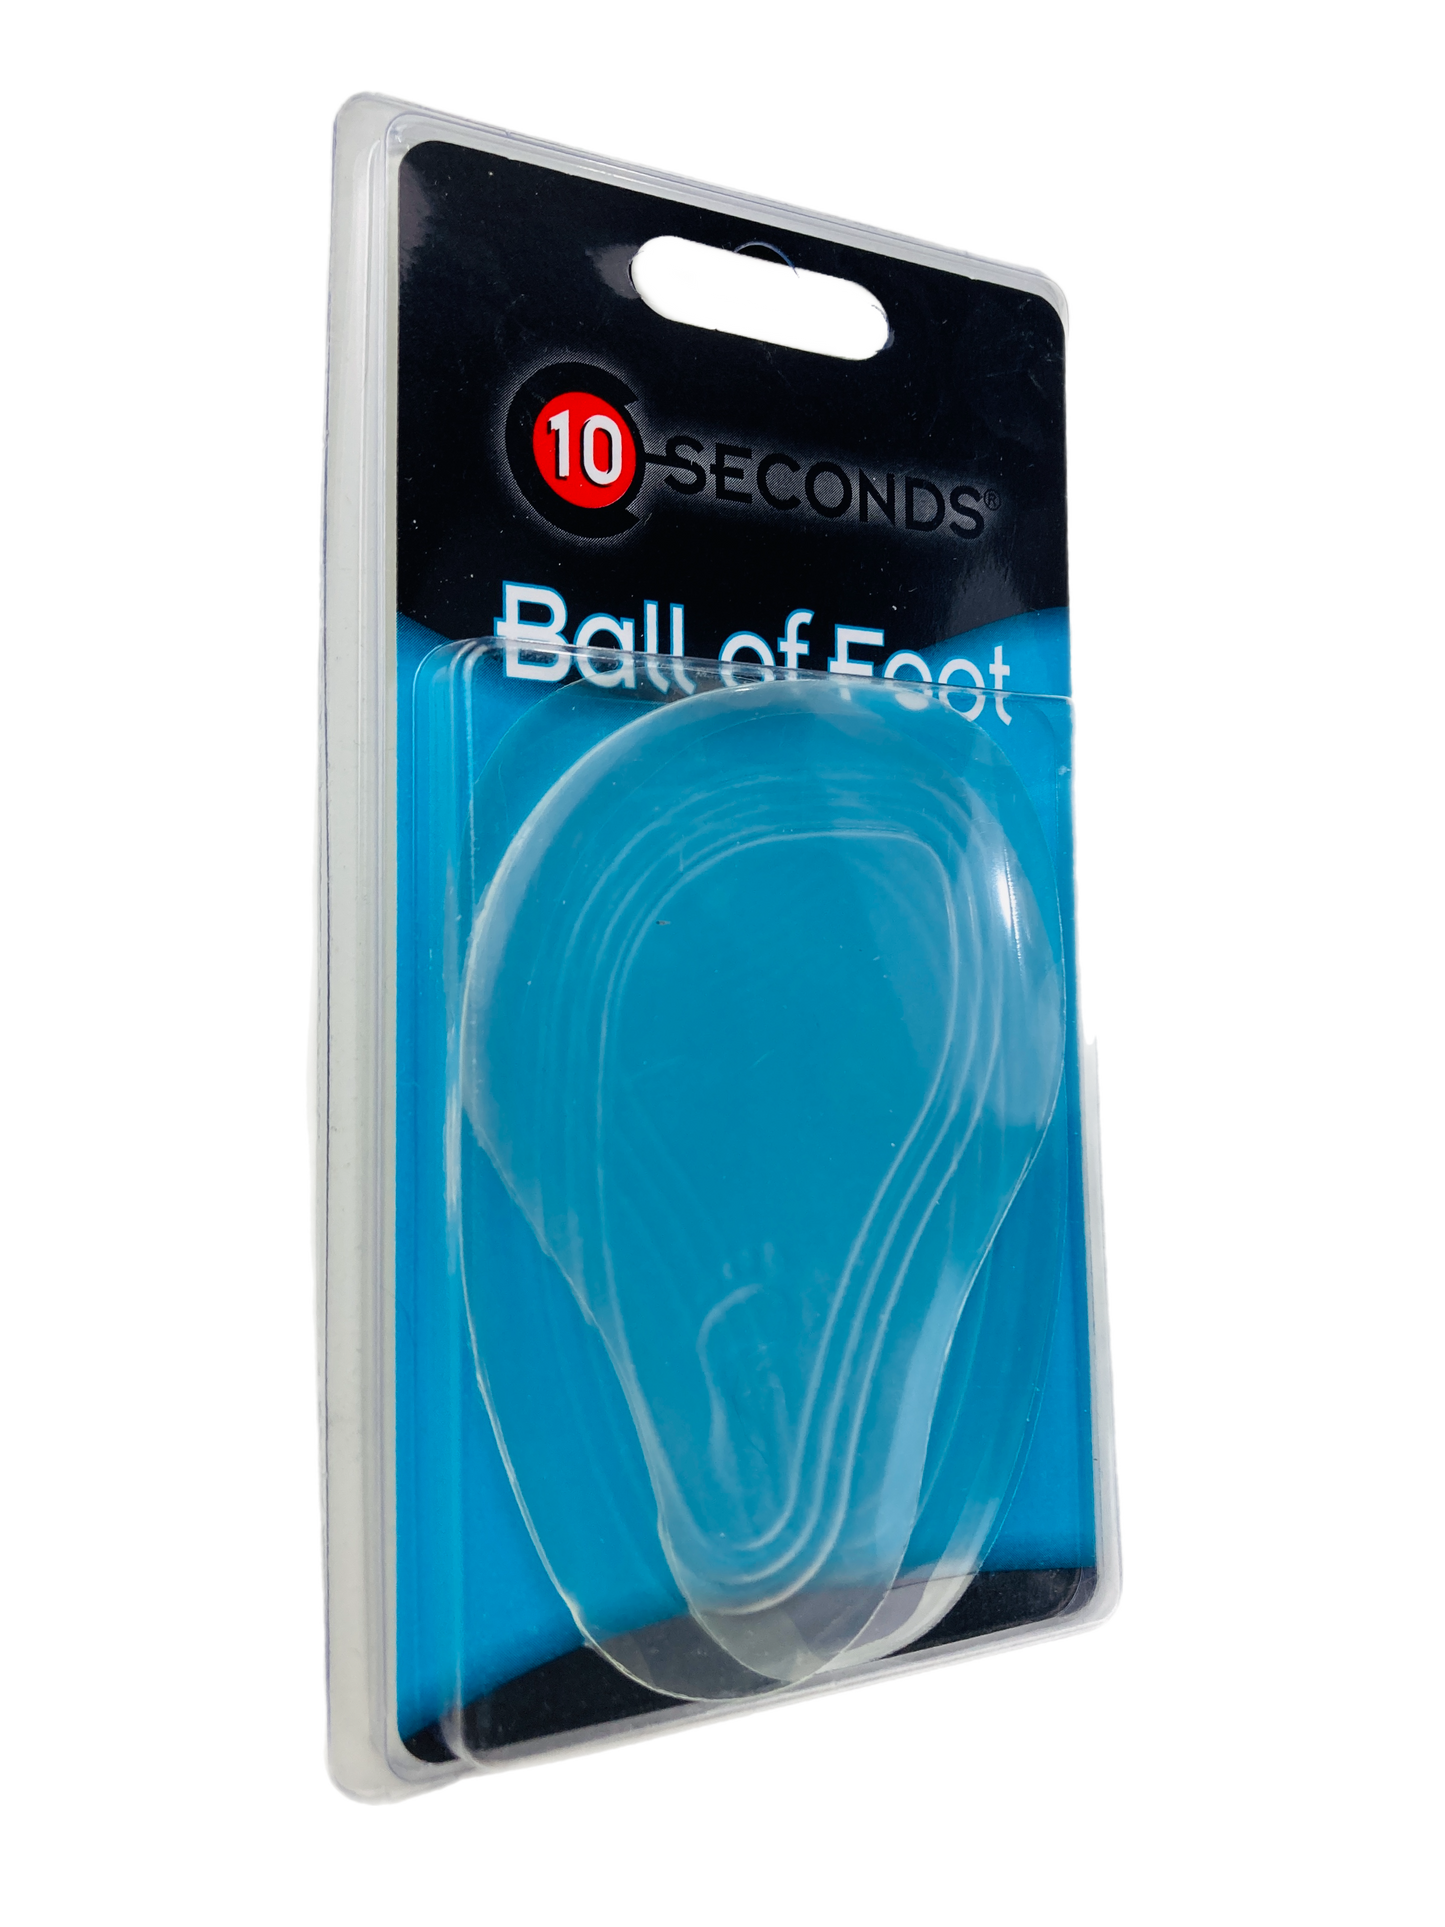 10 Seconds ® Ball of Foot Pads